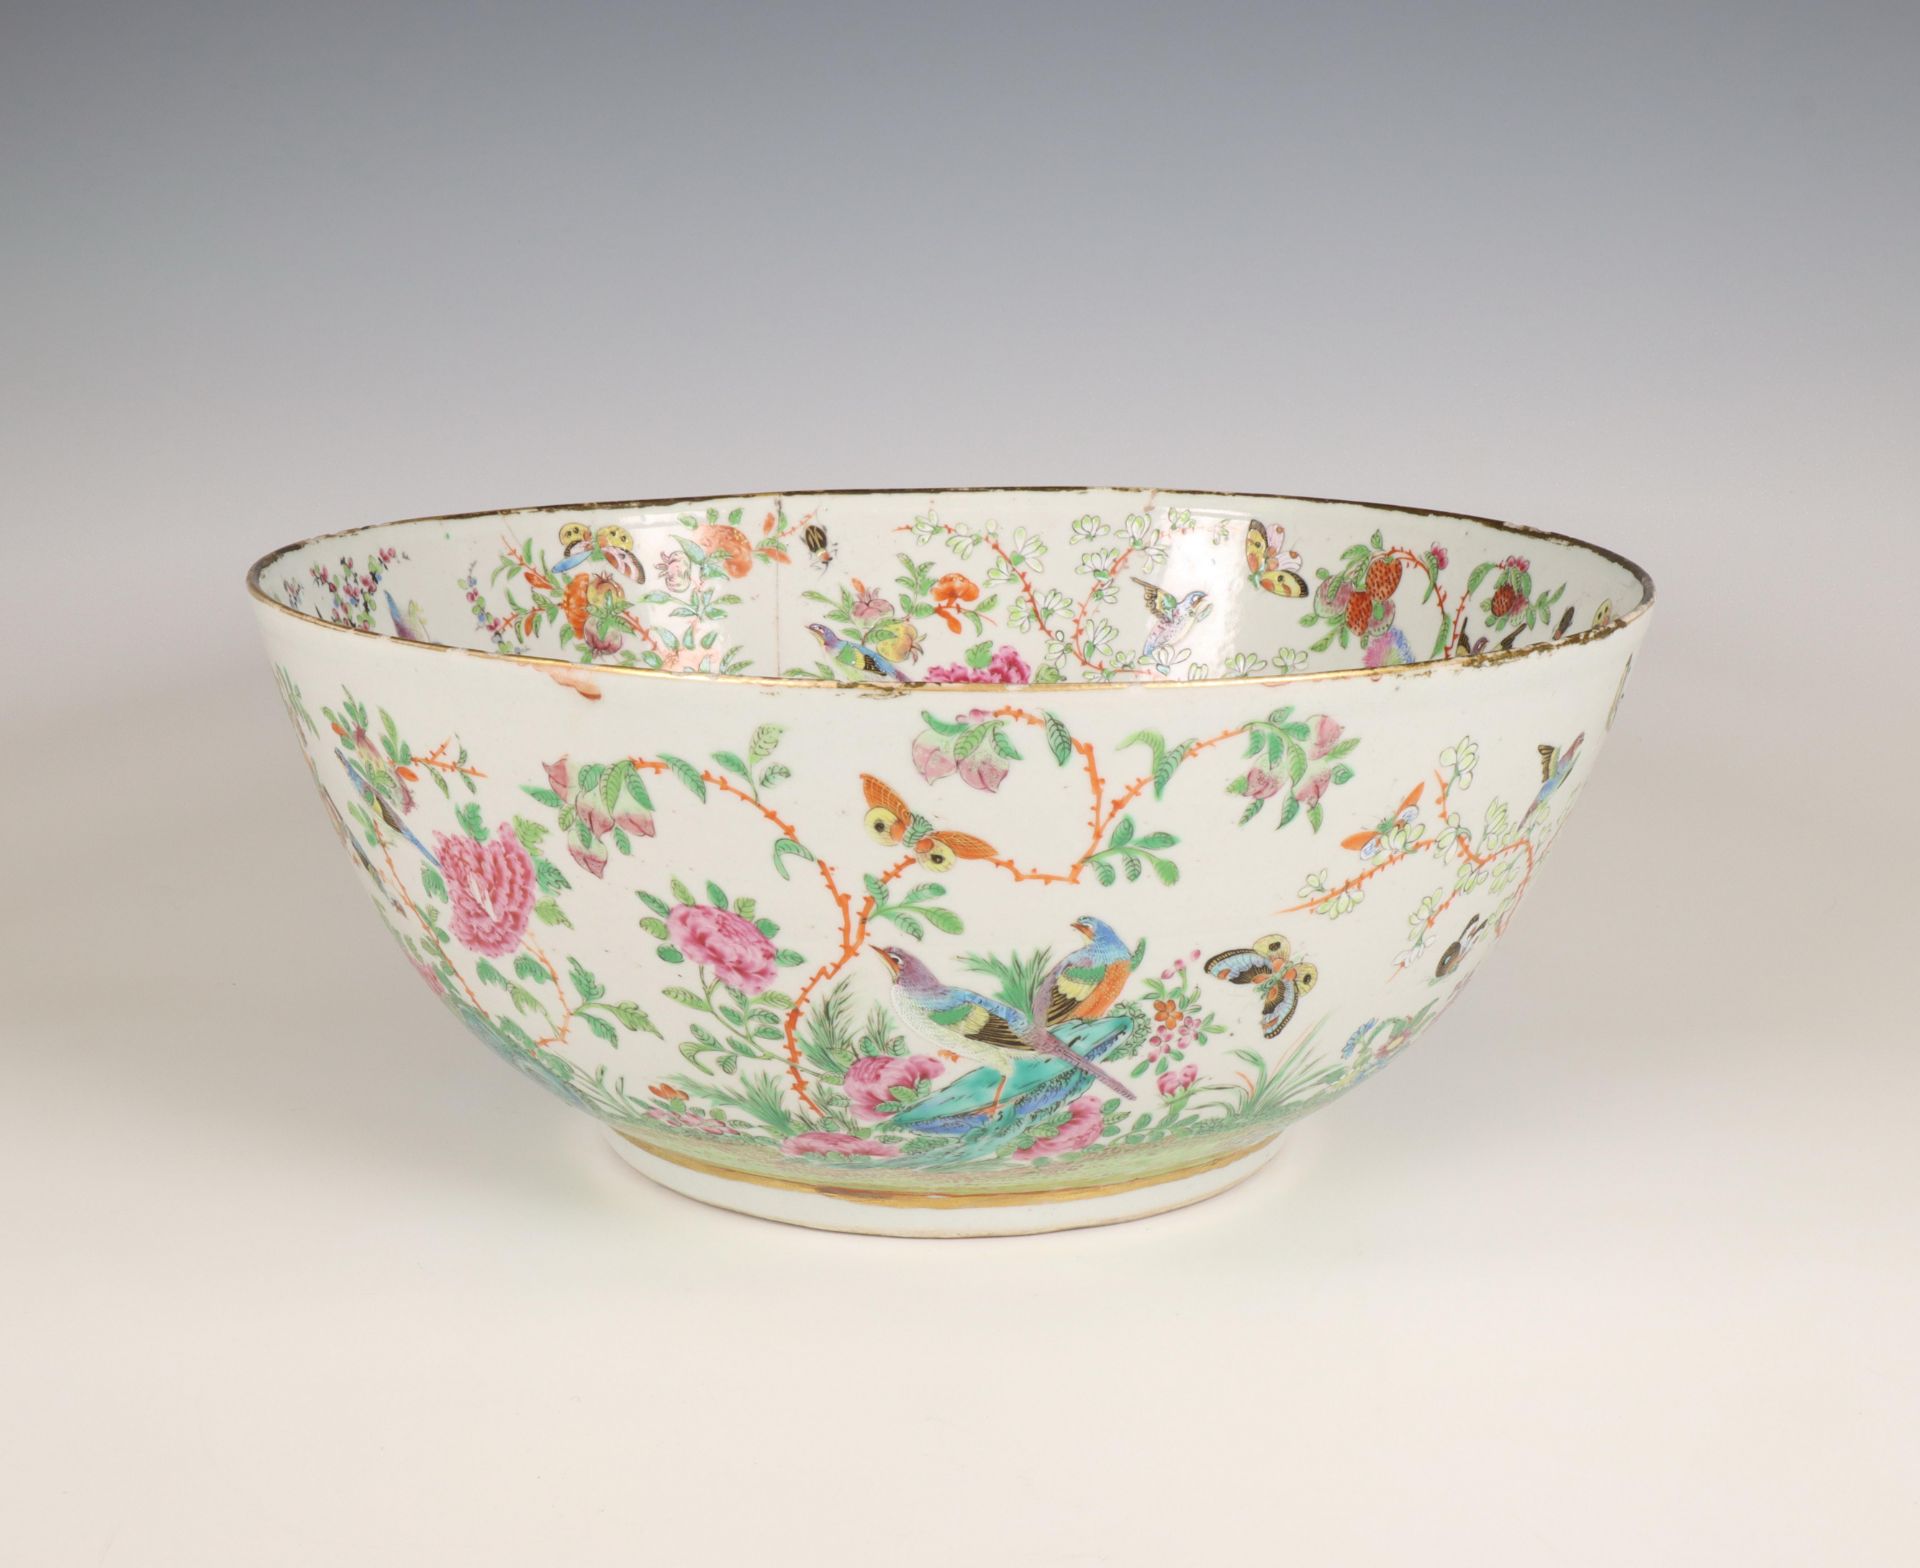 China, Canton famille rose bowl, late 19th century,